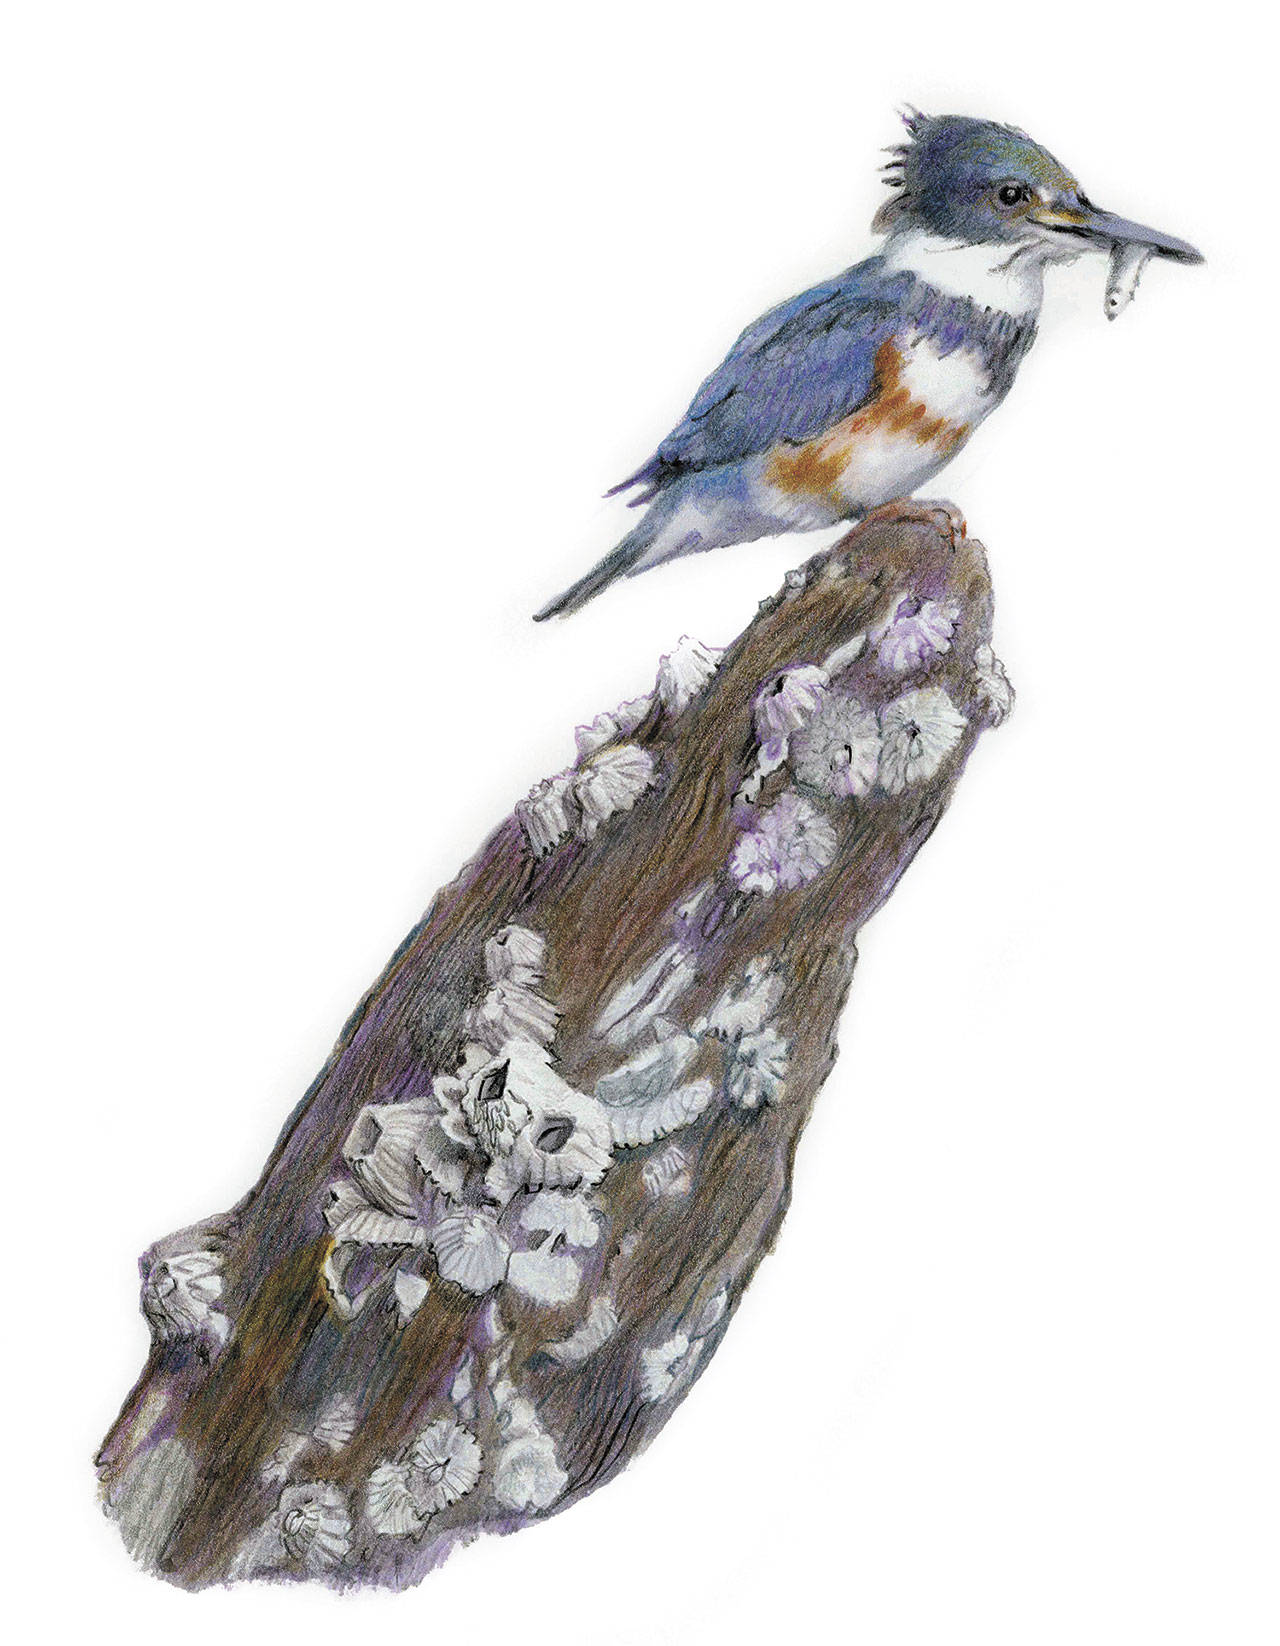 Image courtesy of Cameron Snow                                Cameron Snow’s “Kingfisher.” The artist’s work will be on display, along with photographs from Paul Brians, at the Bainbridge Public Library in August.